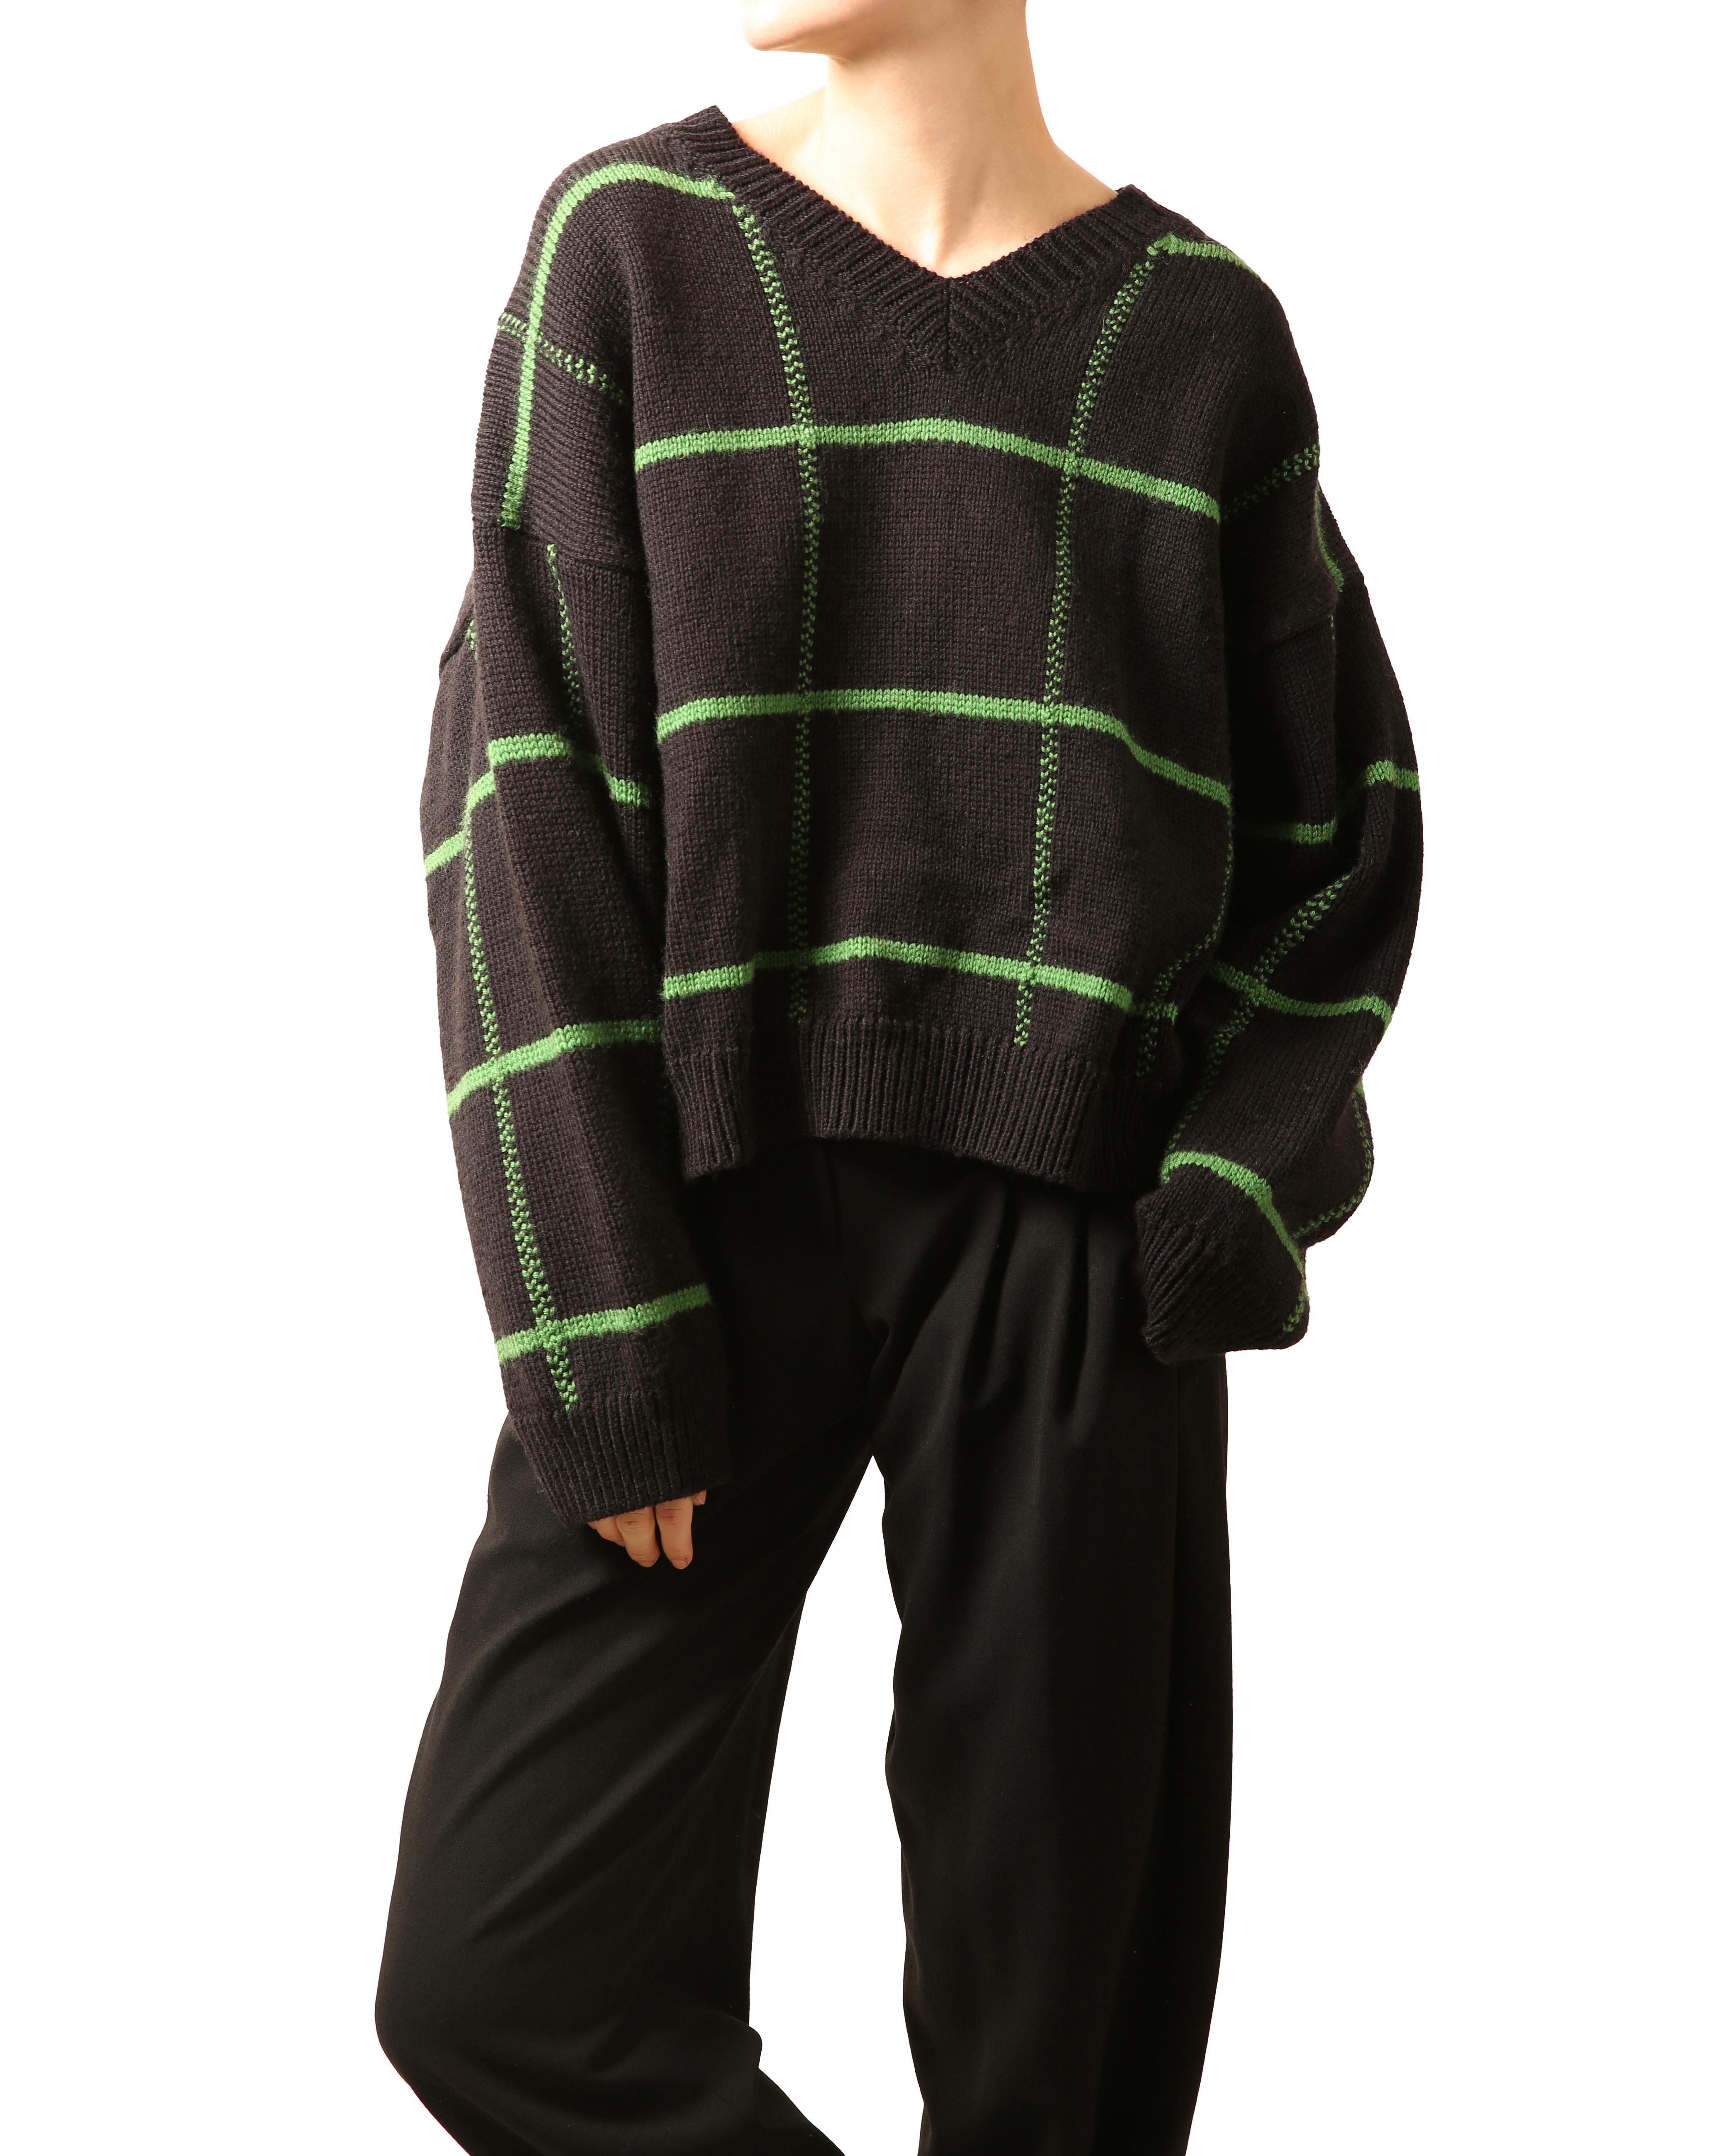 Dries Van Noten oversized knit slouch sweater
Black with green windowpane check style print
V neck
Ribbed neckline, cuffs and hem

Composition:
100% wool

Size:
Large - but will also work for a XS-S-M depending on the desired fit (Please refer to